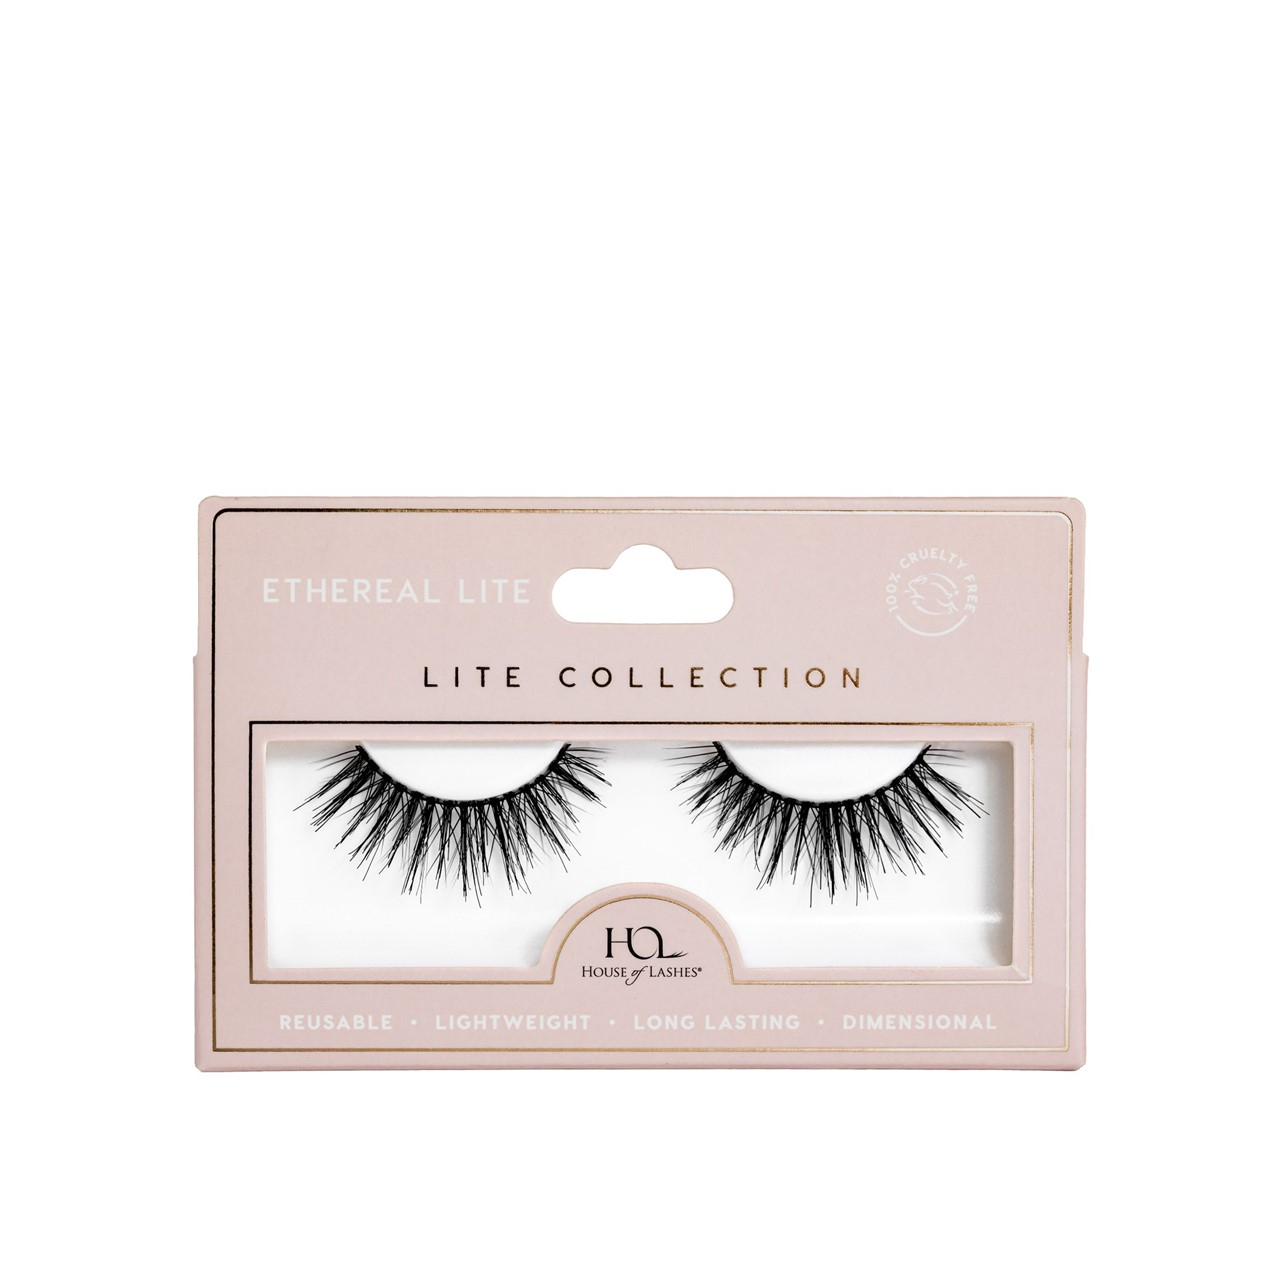 House of Lashes Lite Collection Ethereal Lite False Lashes x1 Pair